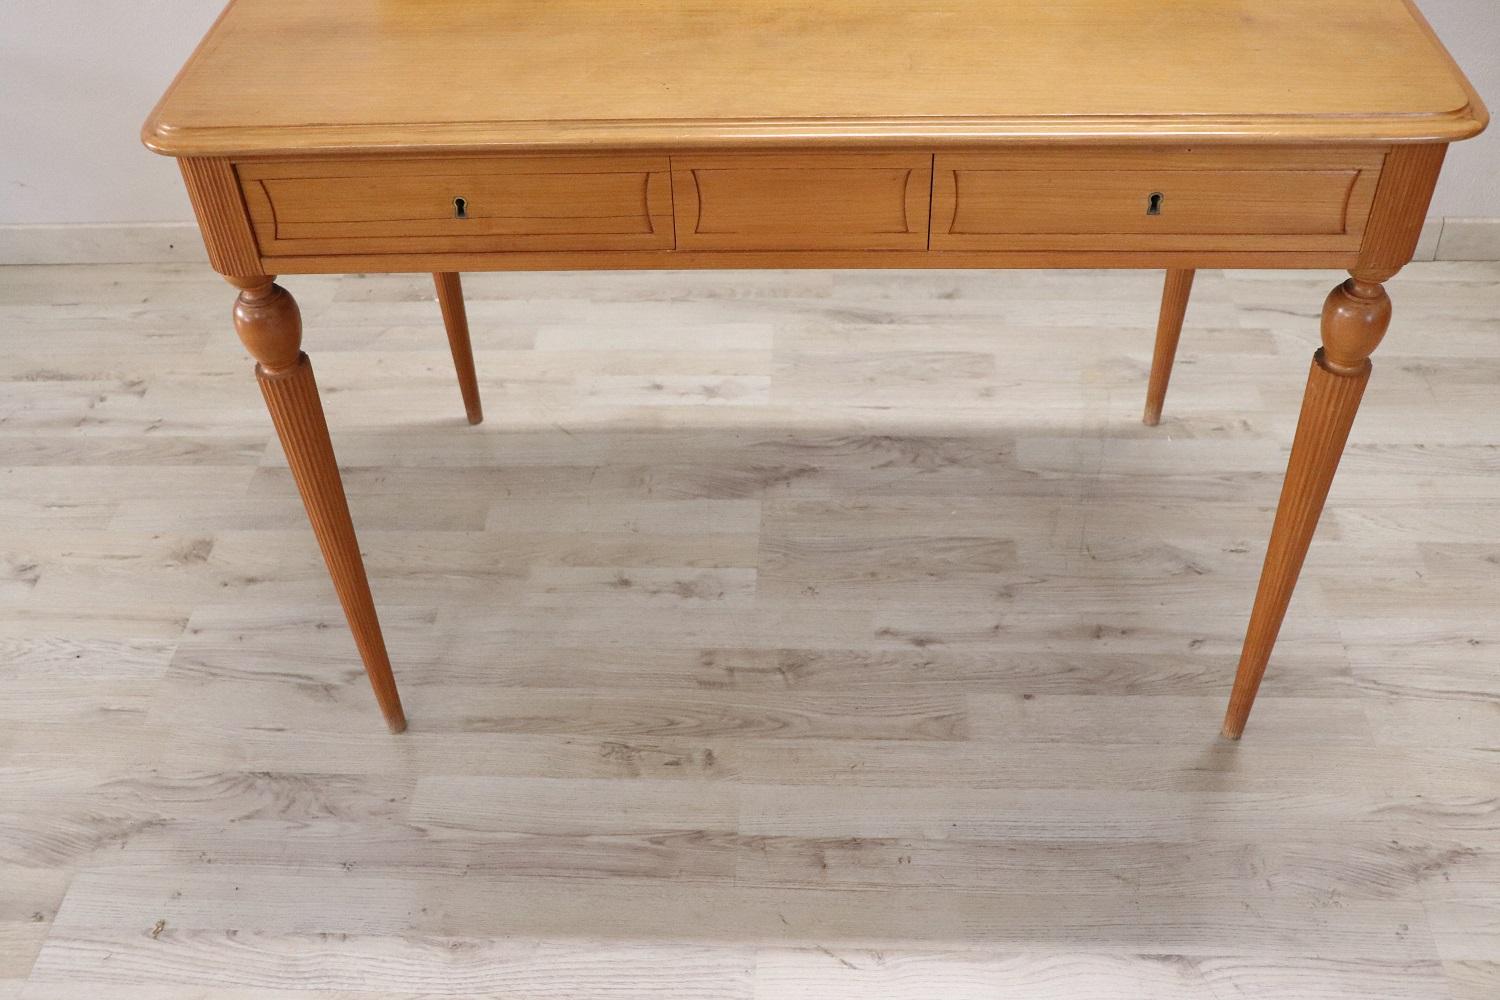 Very refined this vintage Italian desk from the 1960s. Made of very light walnut wood. slender but solid legs. Ample space on the top equipped with two comfortable drawers. Simple and linear, perfect for a modern environment. Perfect condition ready